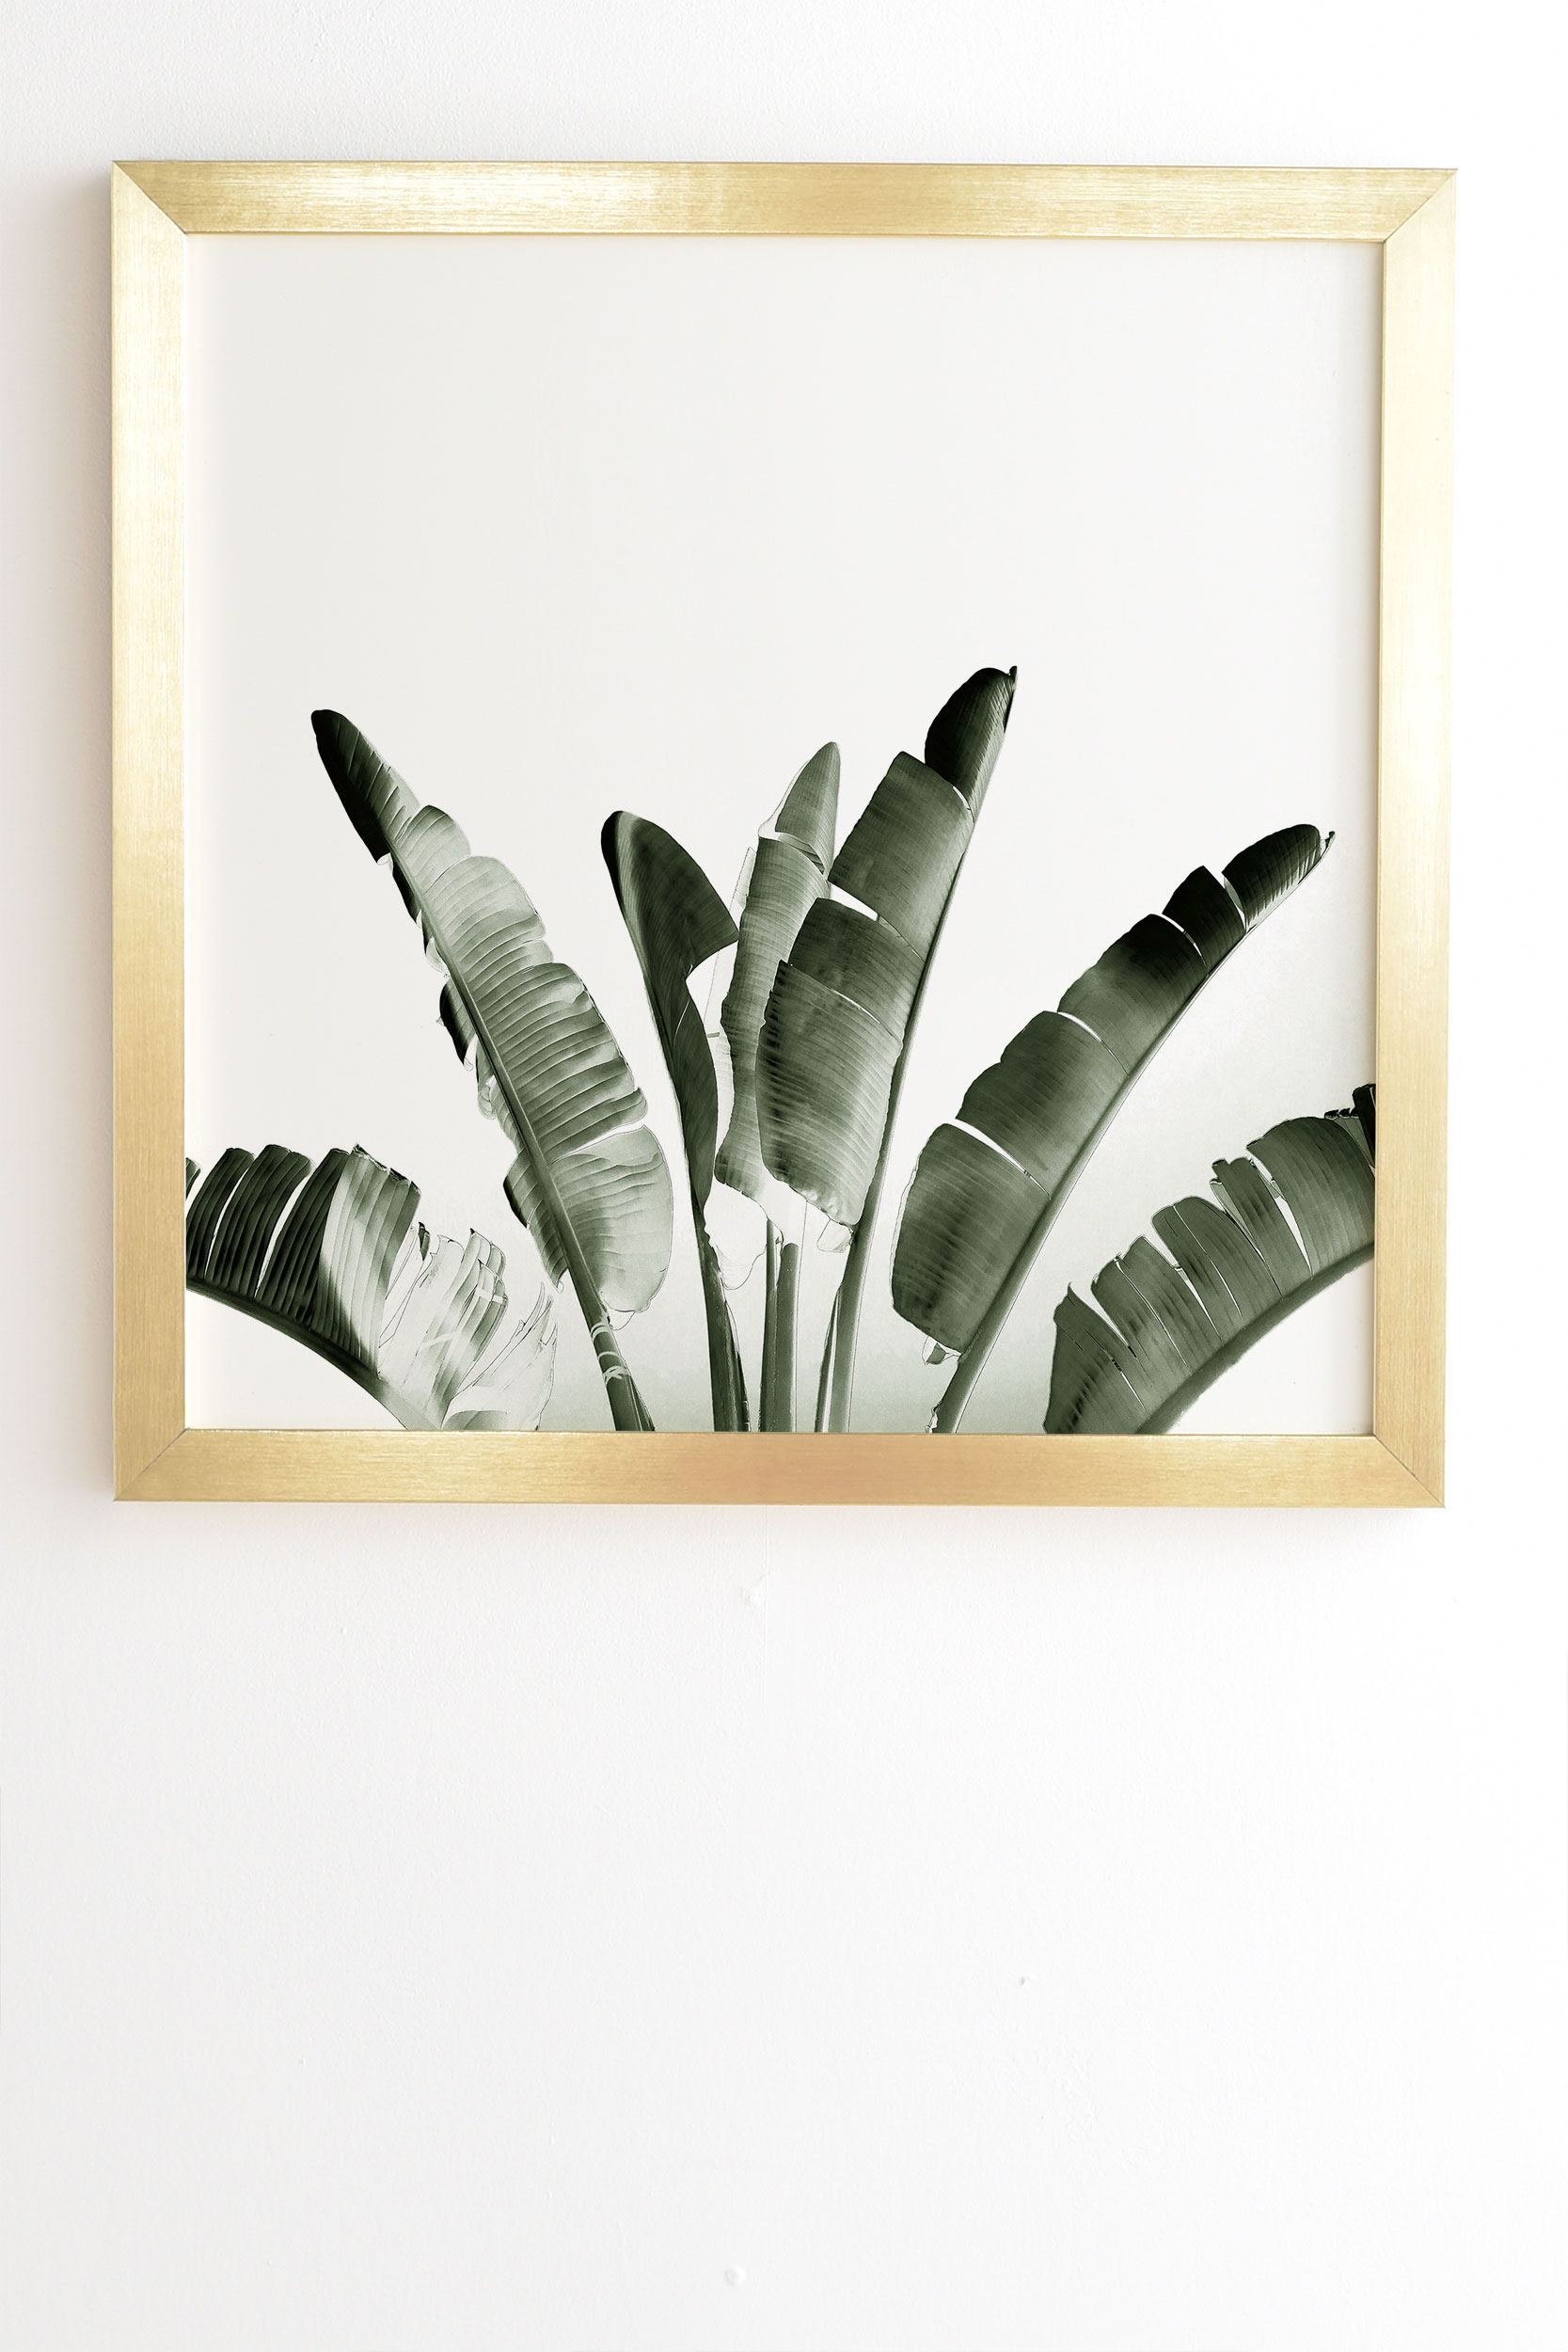 Traveler Palm by Gale Switzer - Framed Wall Art Basic Gold 19" x 22.4" - Image 1